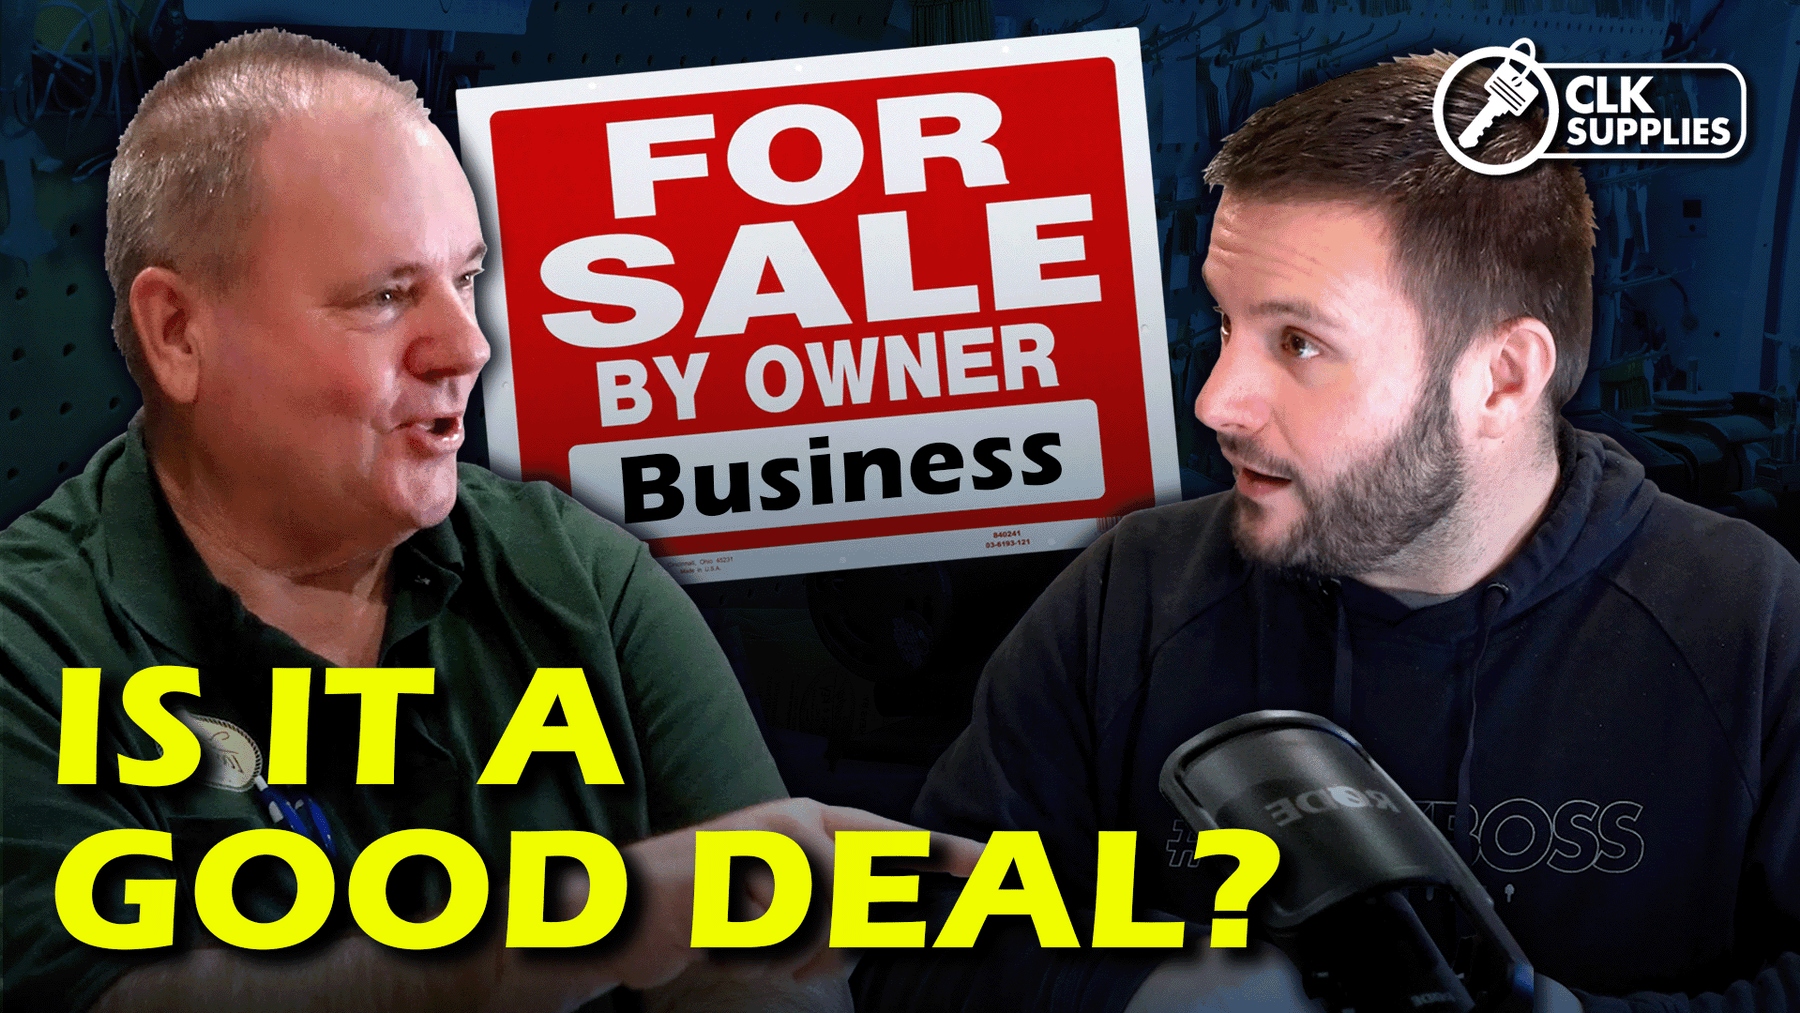 Locksmith Business for Sale: A Good Deal?